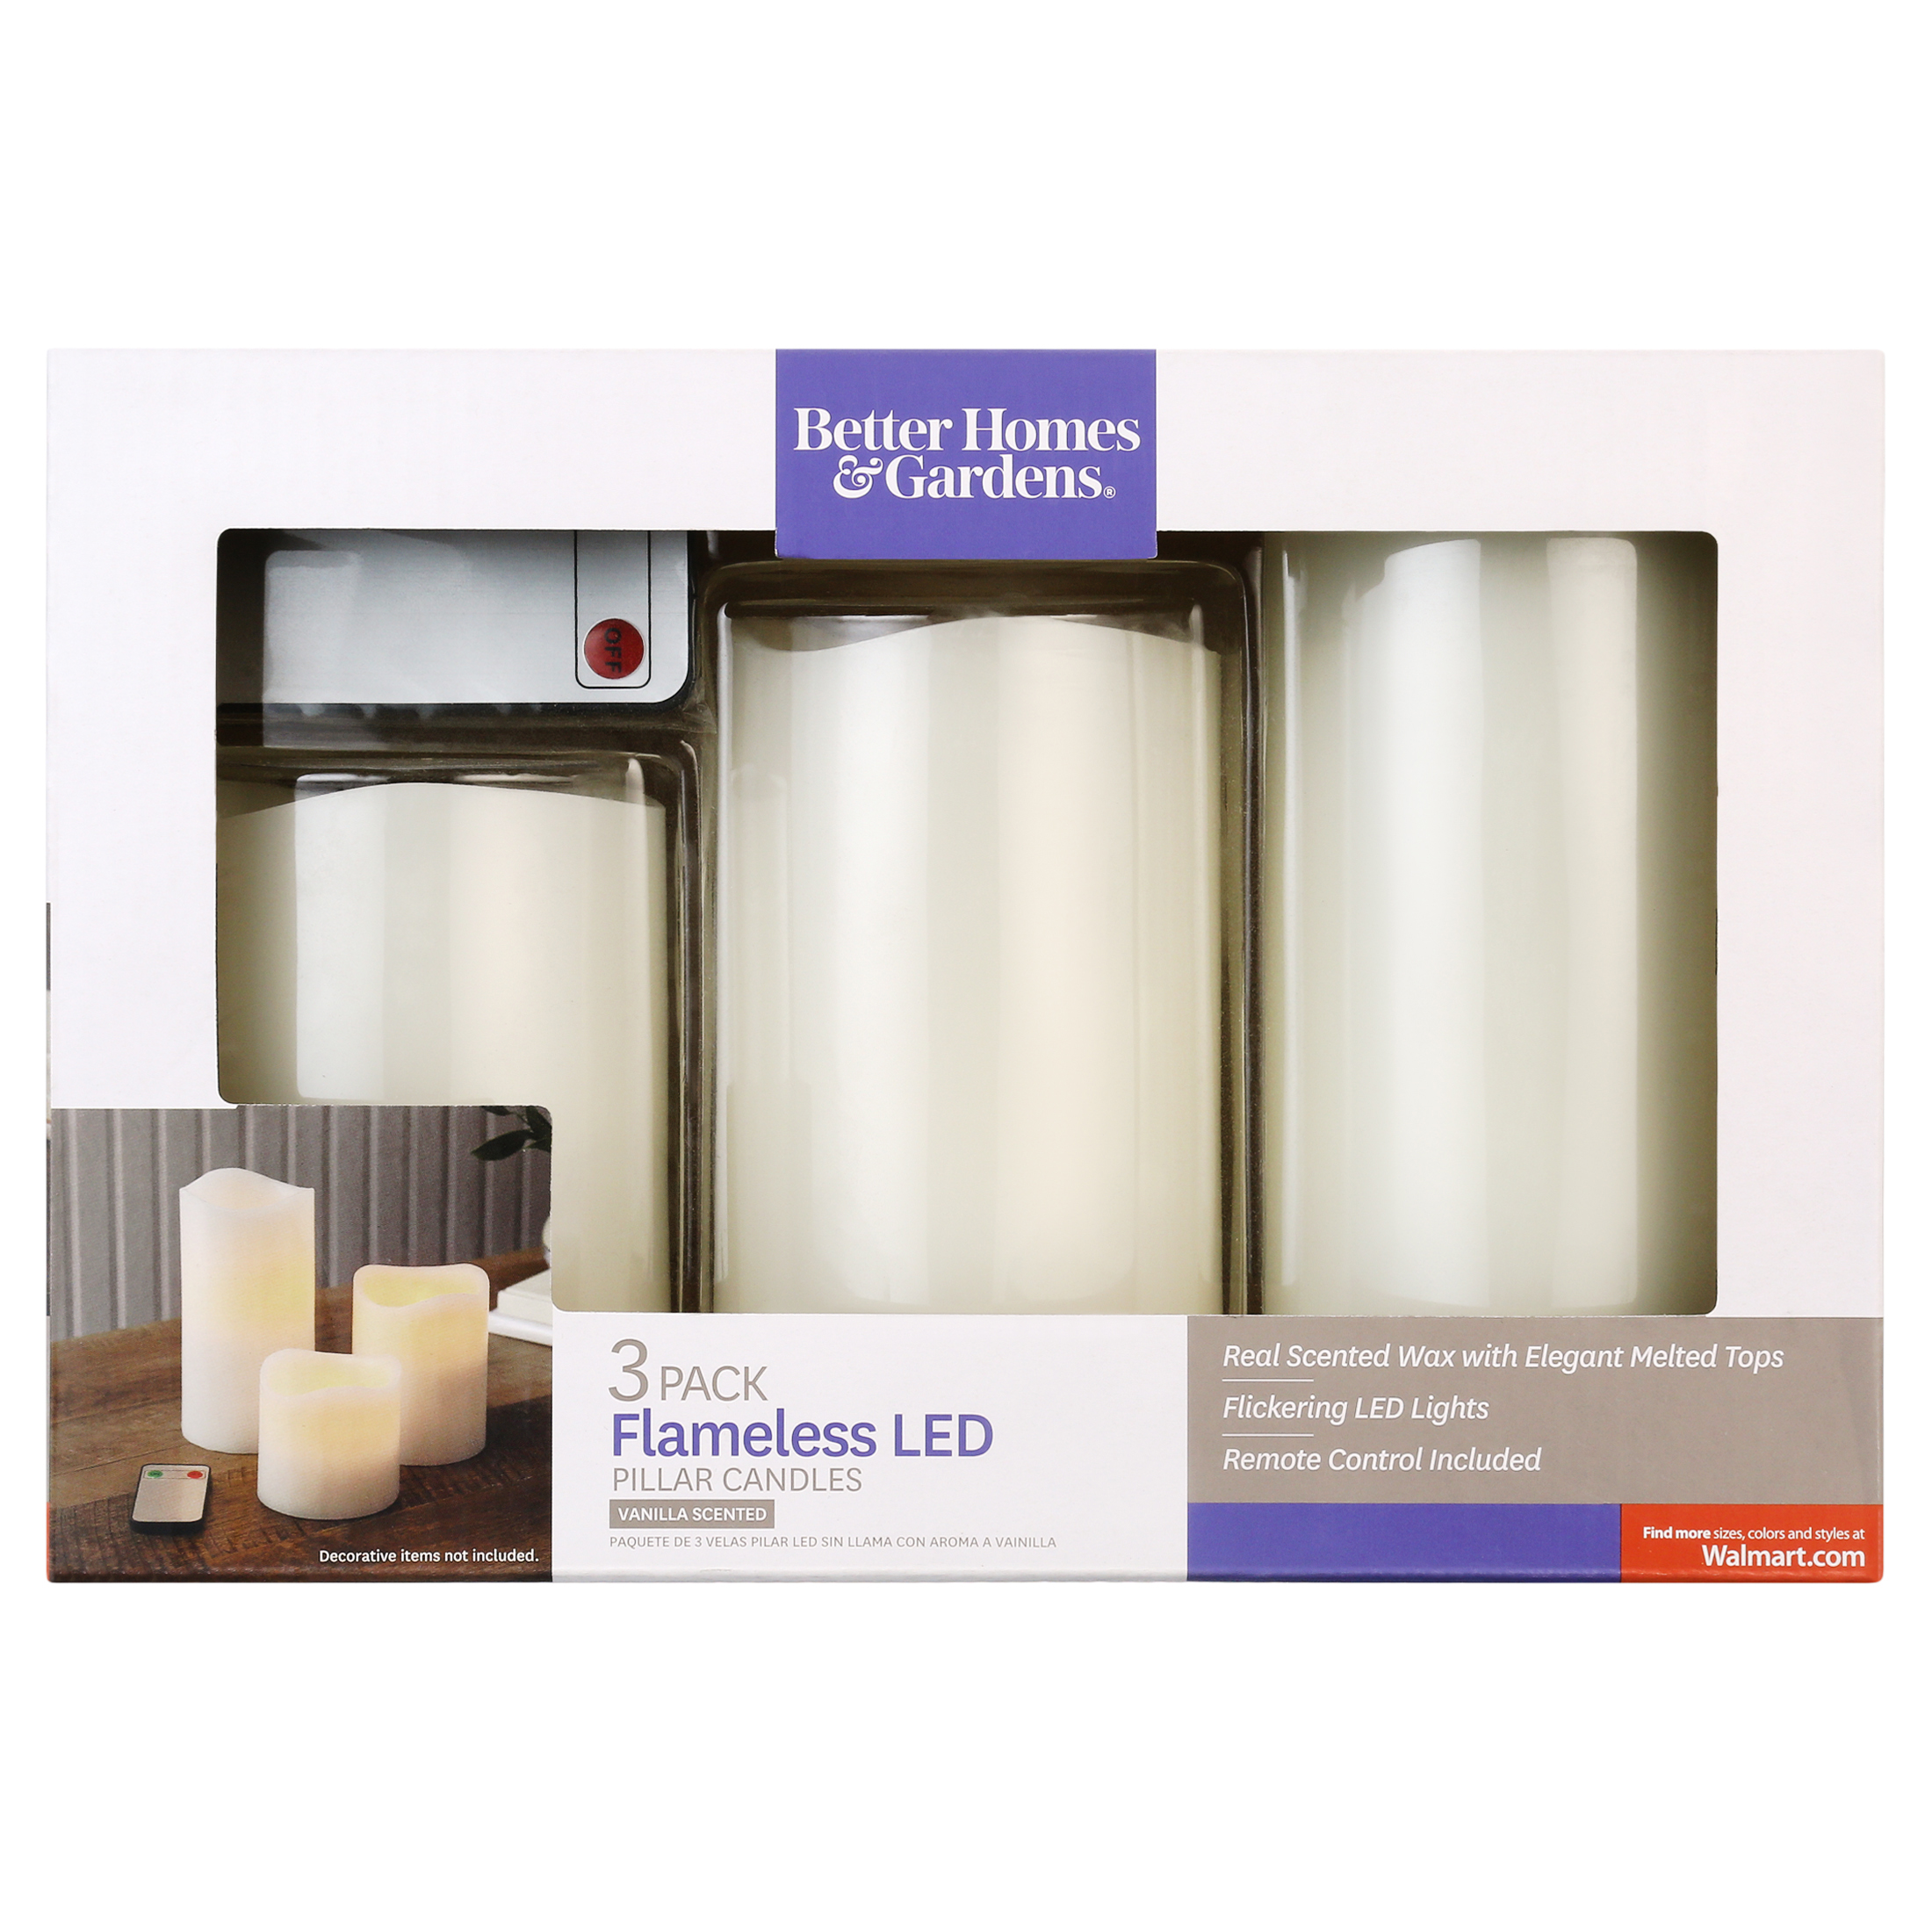 Better Homes & Gardens Flameless LED Pillar Candles 3-Pack Vanilla Scented - image 2 of 9